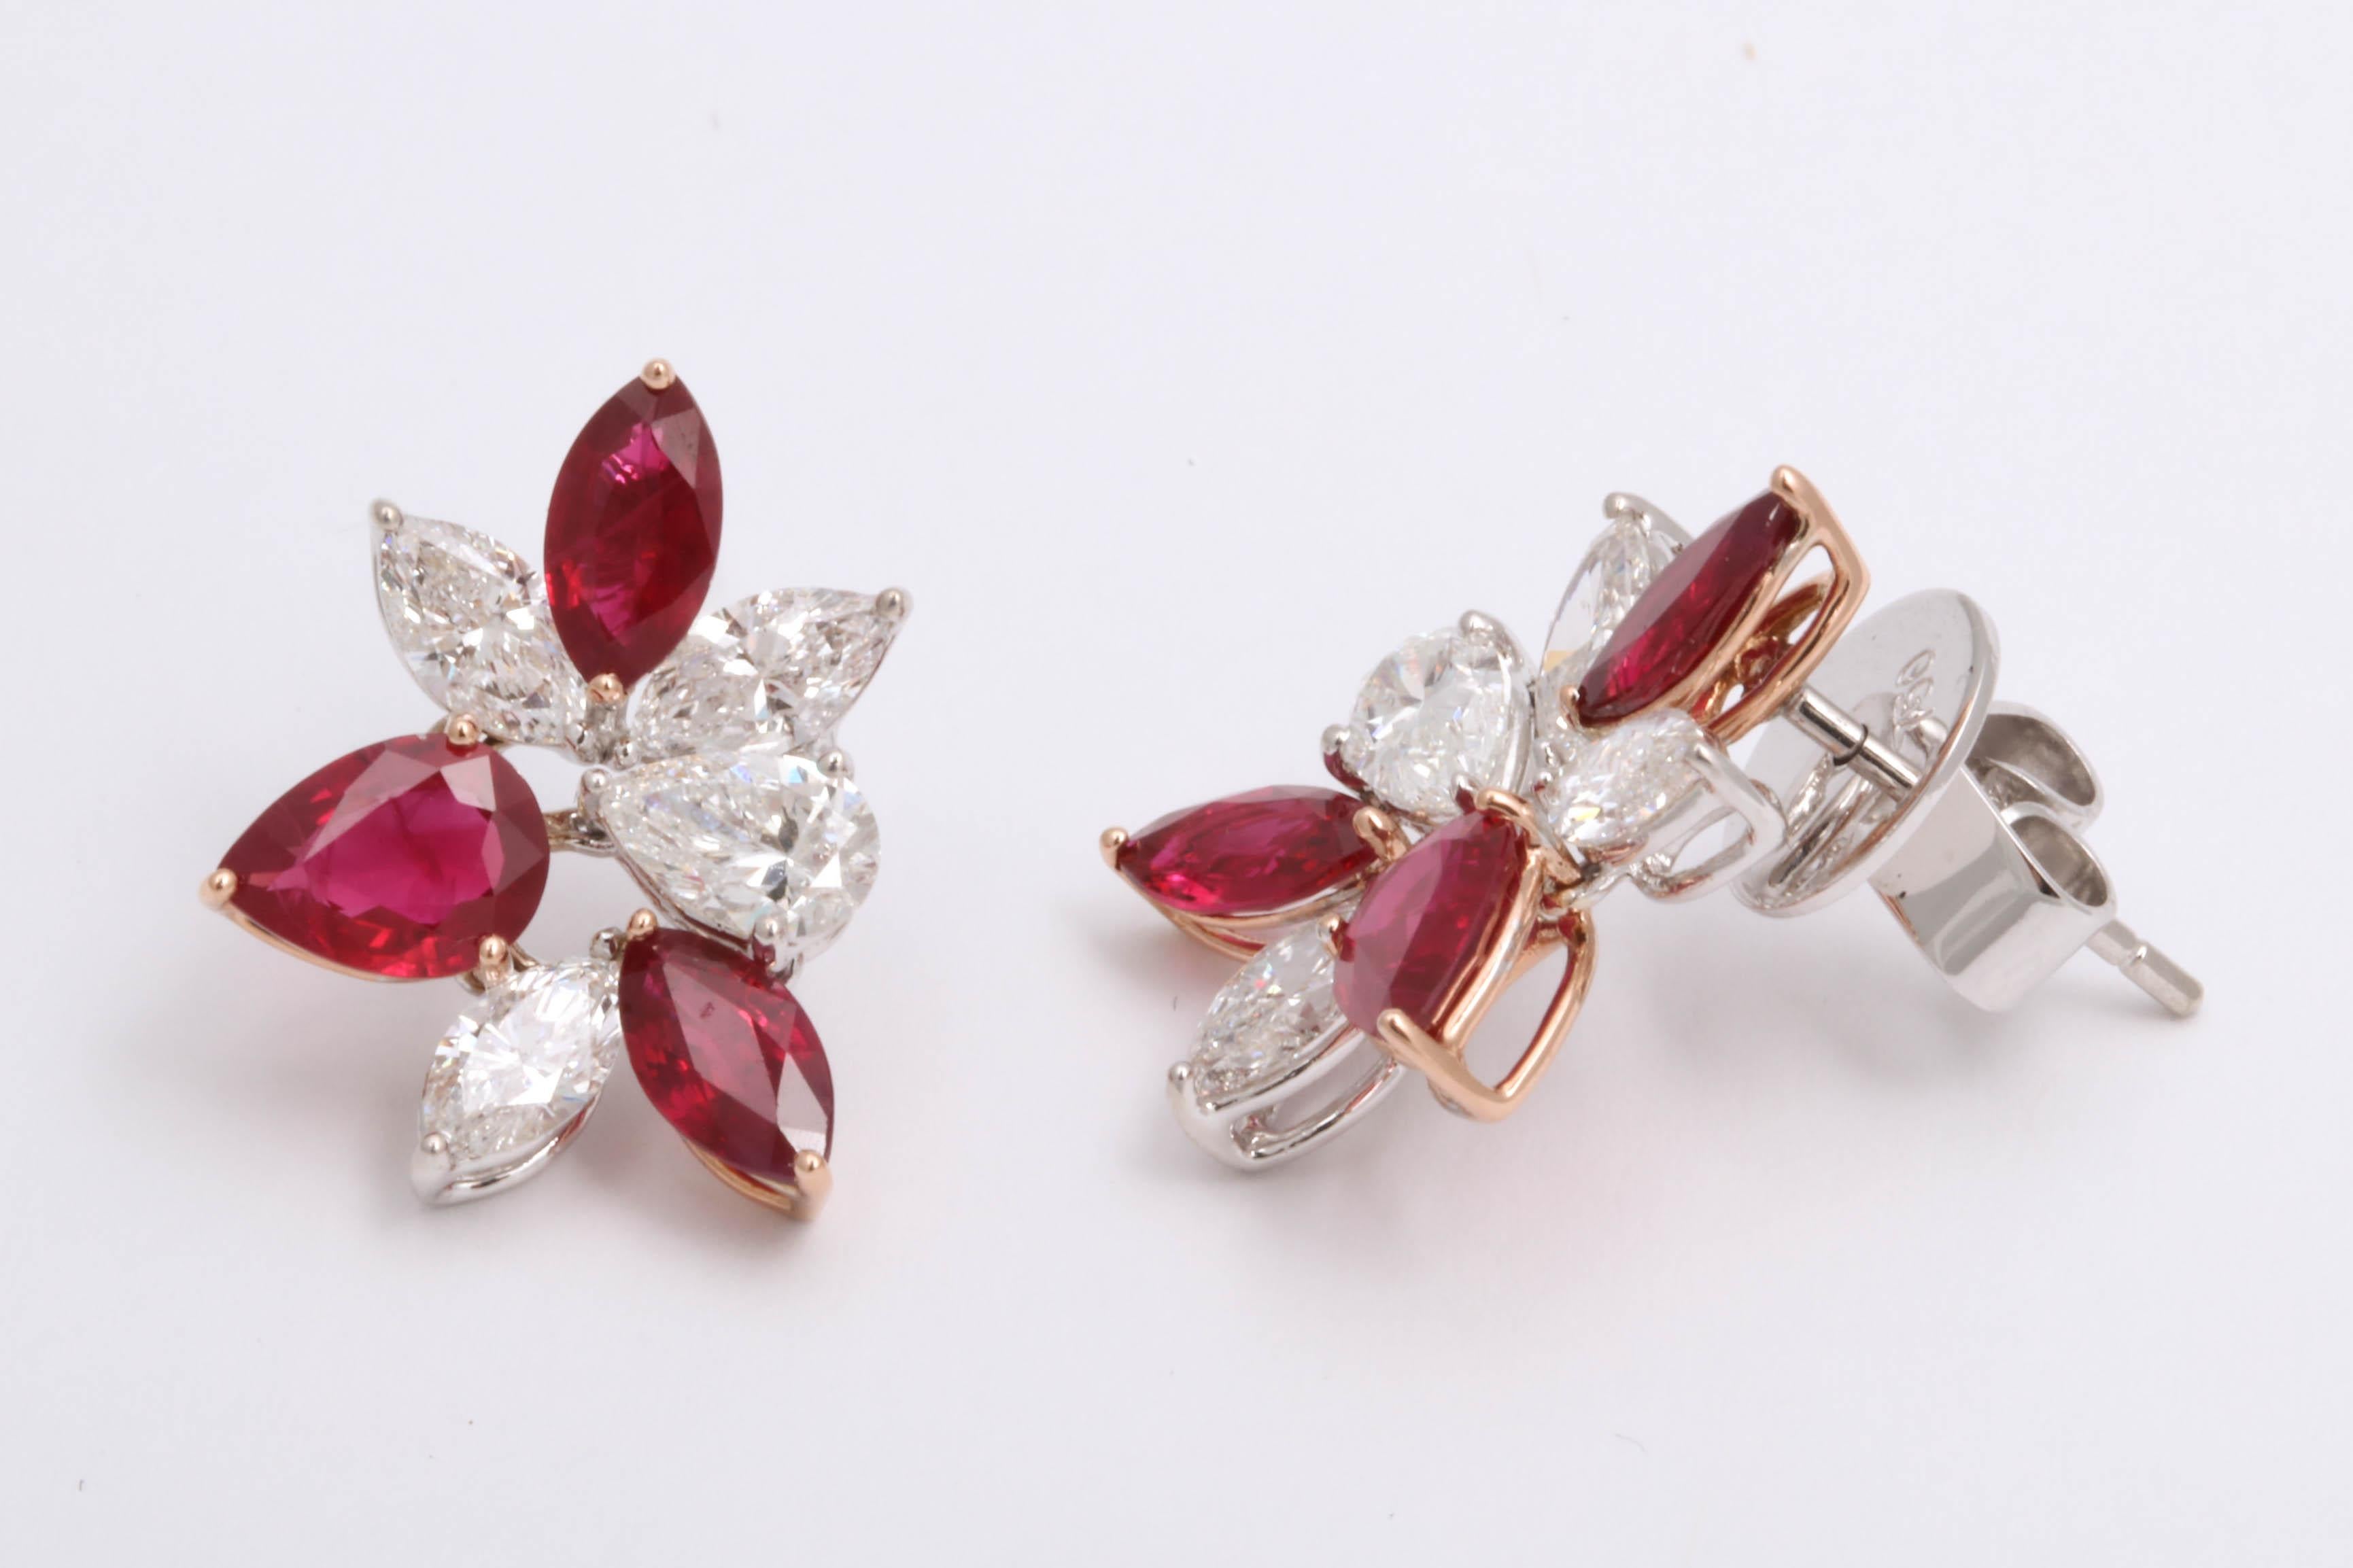 
A beautiful and elegant pair of wearable ruby and diamond earrings.

3.39 carats of pear and marquise shaped fine ruby

2.51 carats of white marquis and pear shaped diamonds 

18k yellow and white gold.

Approximately .75 inches from its highest to